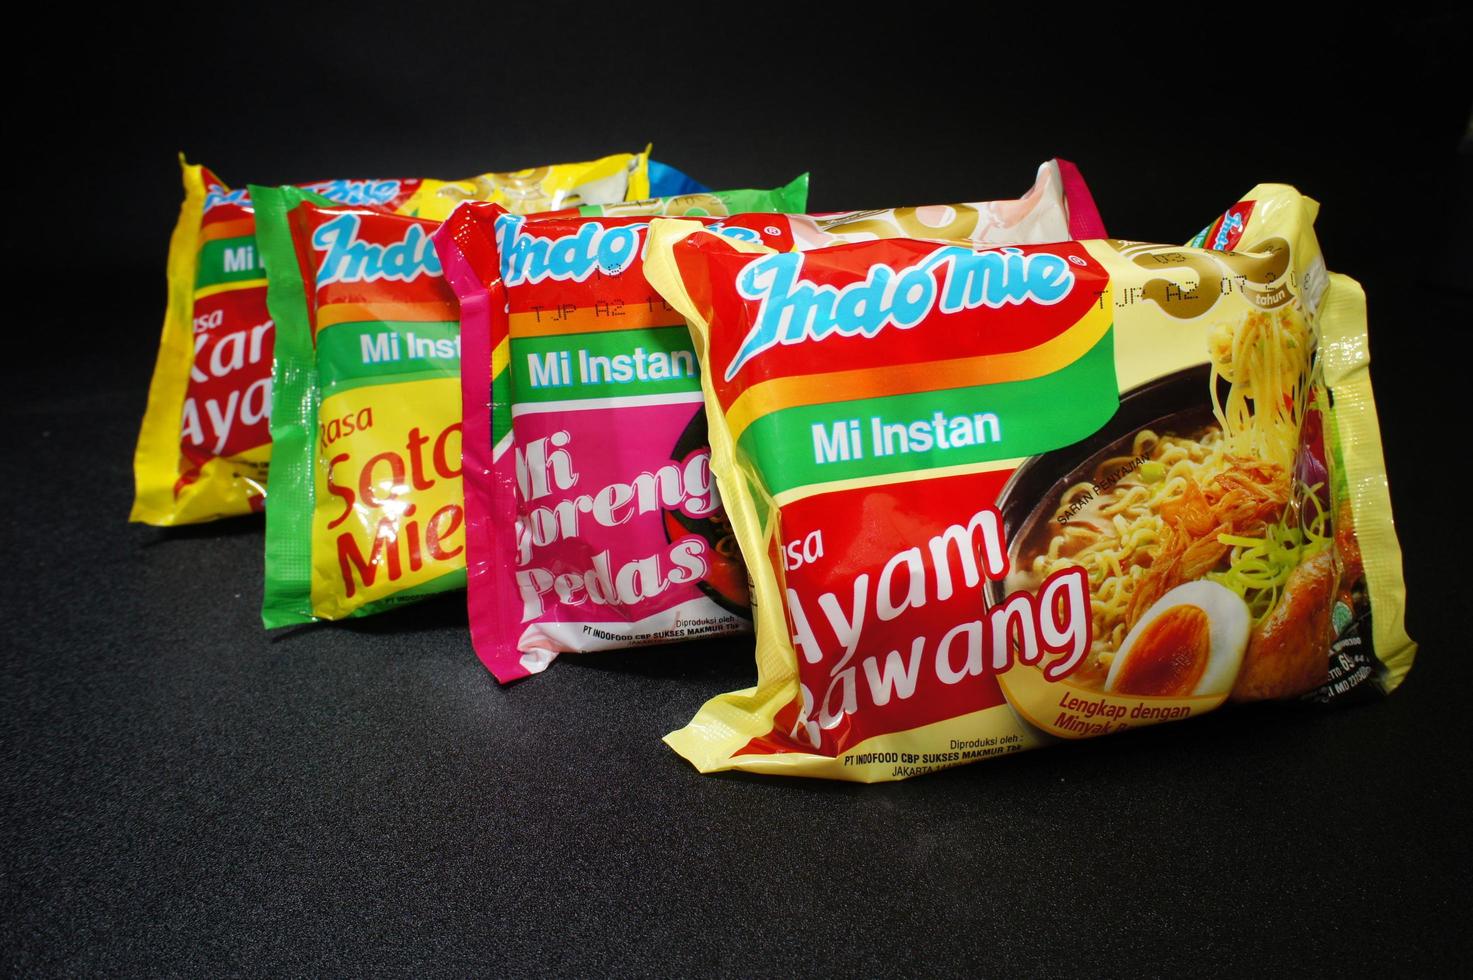 Tangerang, Indonesia  March 5, 2022 Indomie, fried instant noodles, boiled, spicy, Indonesia's favorite food, ready to photo